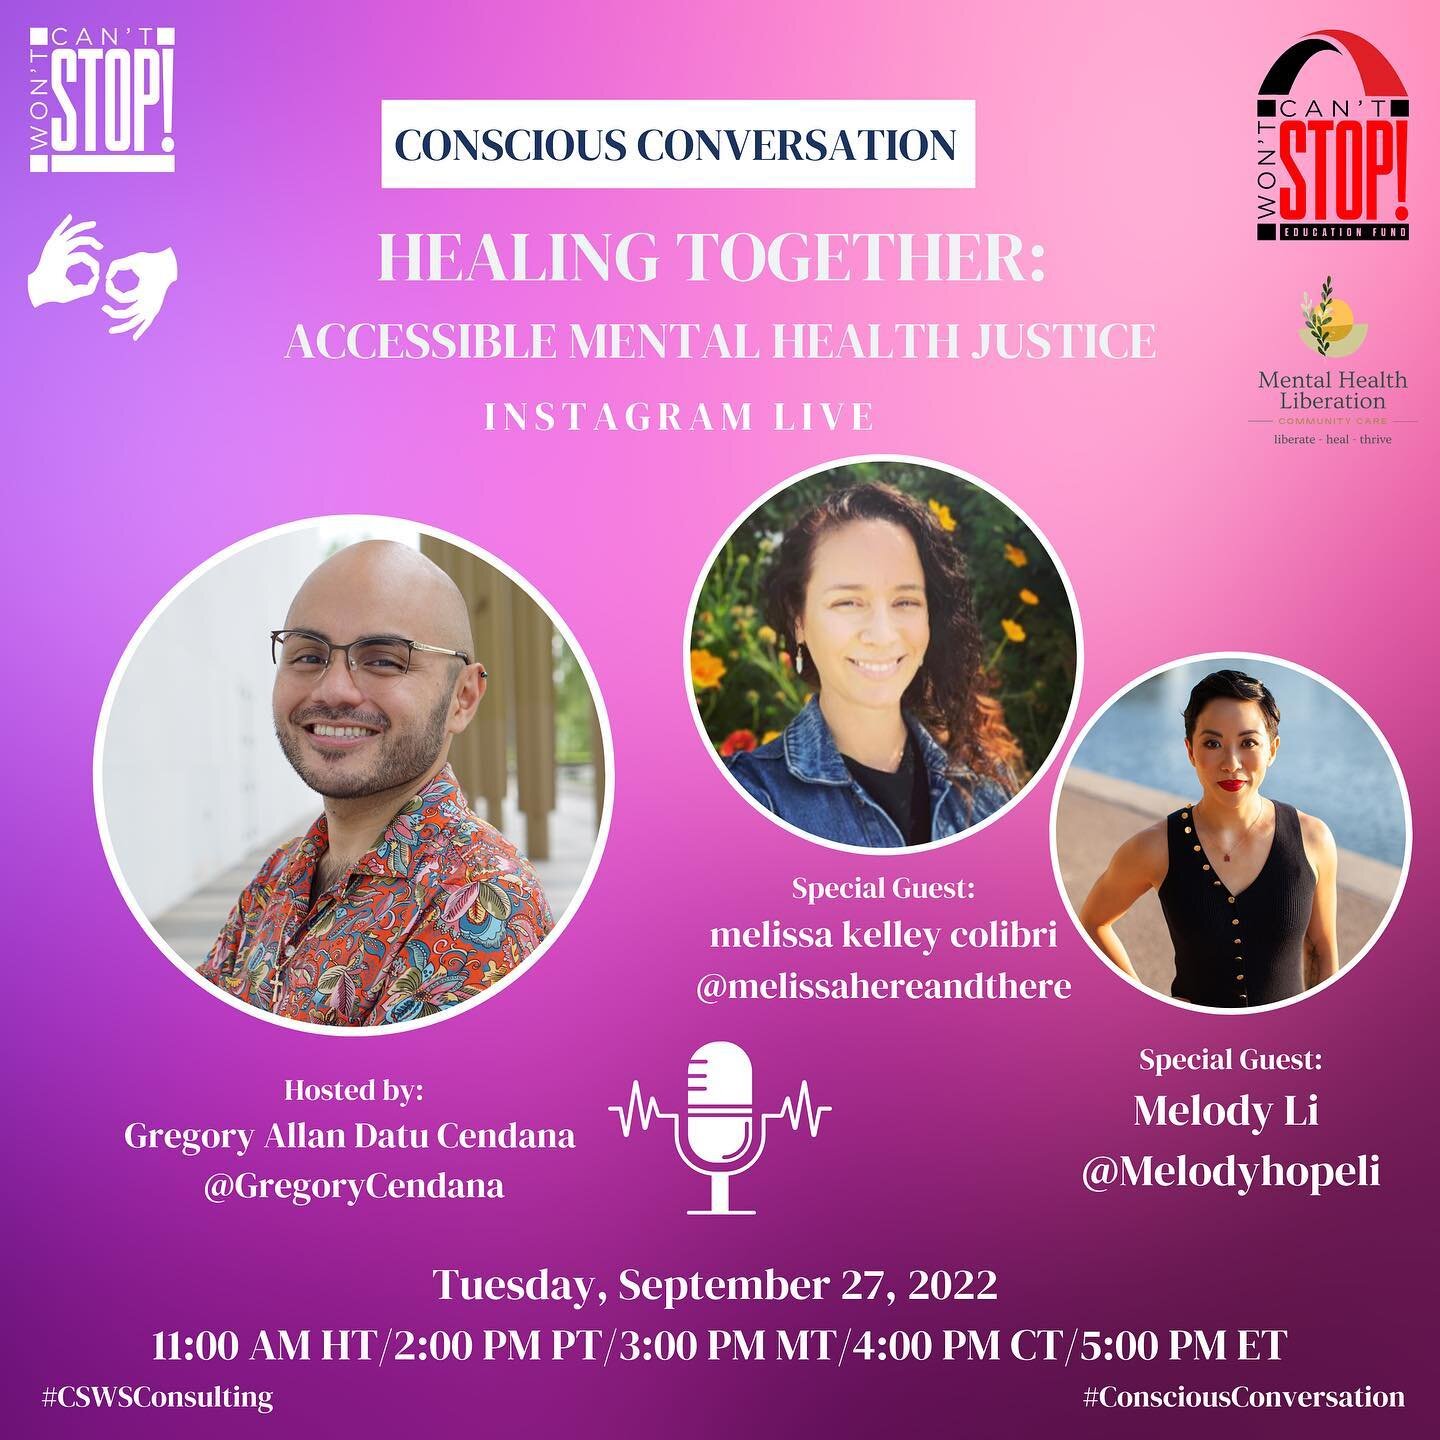 Join us for our next Conscious Conversation! Our President and Co-Founder, Gregory Allan Datu Cendana (@gregorycendana), will interview Accessibility Coordinator melissa kelley colibr&iacute; (@melissahereandthere), and Mentah Health Liberation Activ